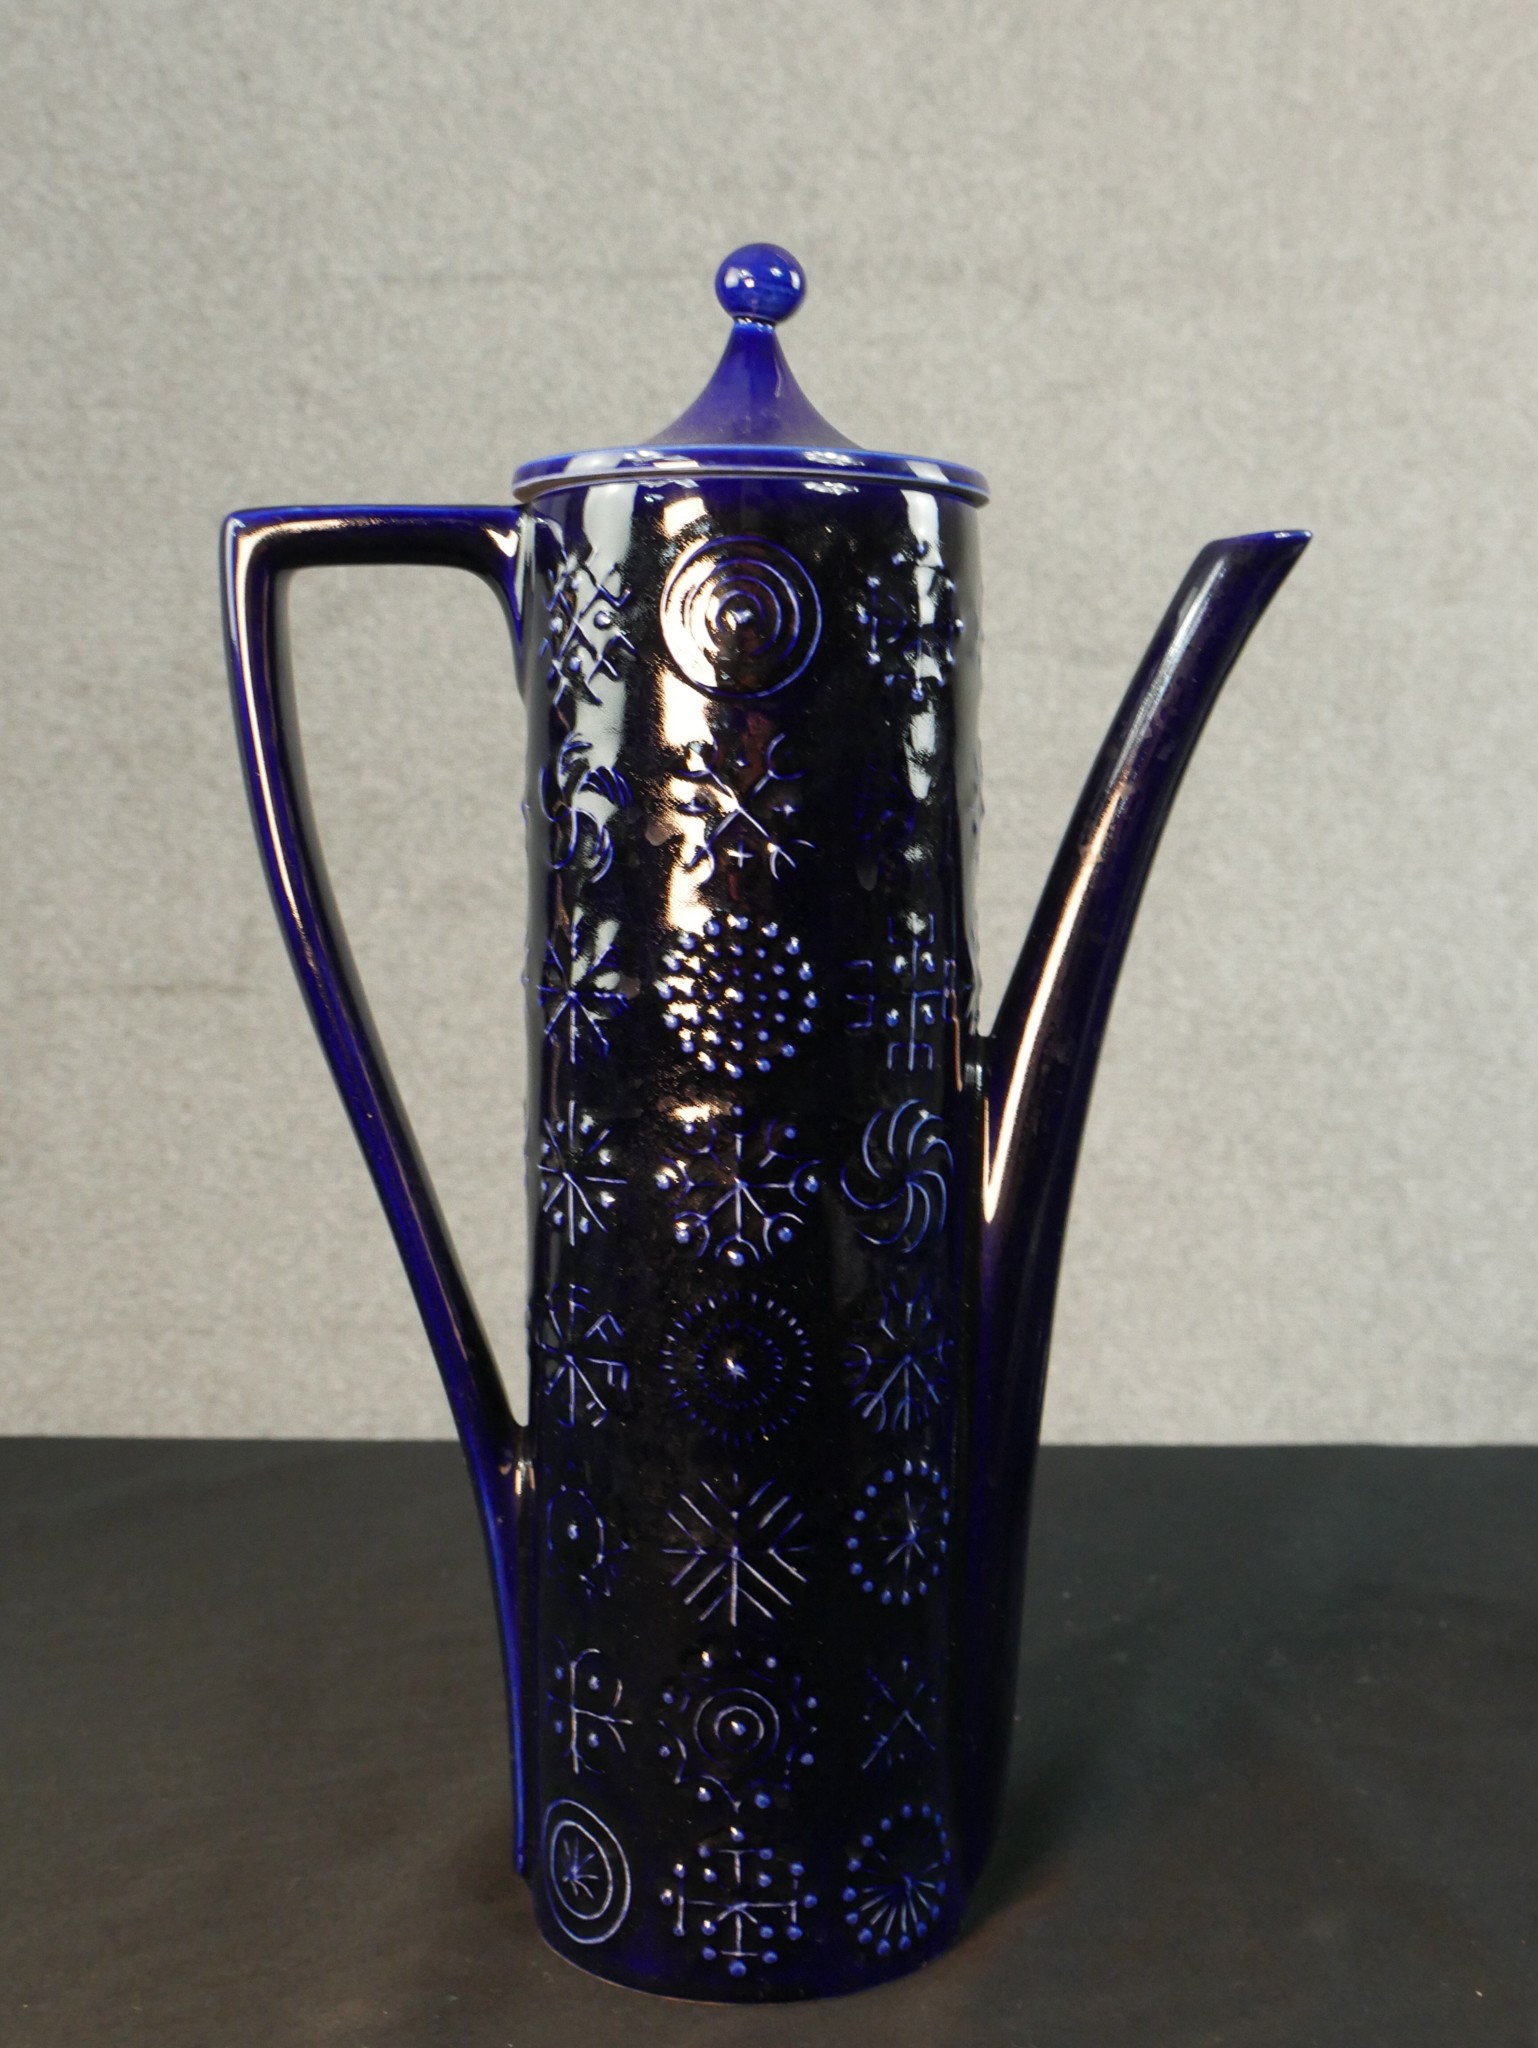 Susan Williams-Ellis for Portmeirion, a Totem pattern coffee set in a cobalt blue glaze, to seat - Image 2 of 6